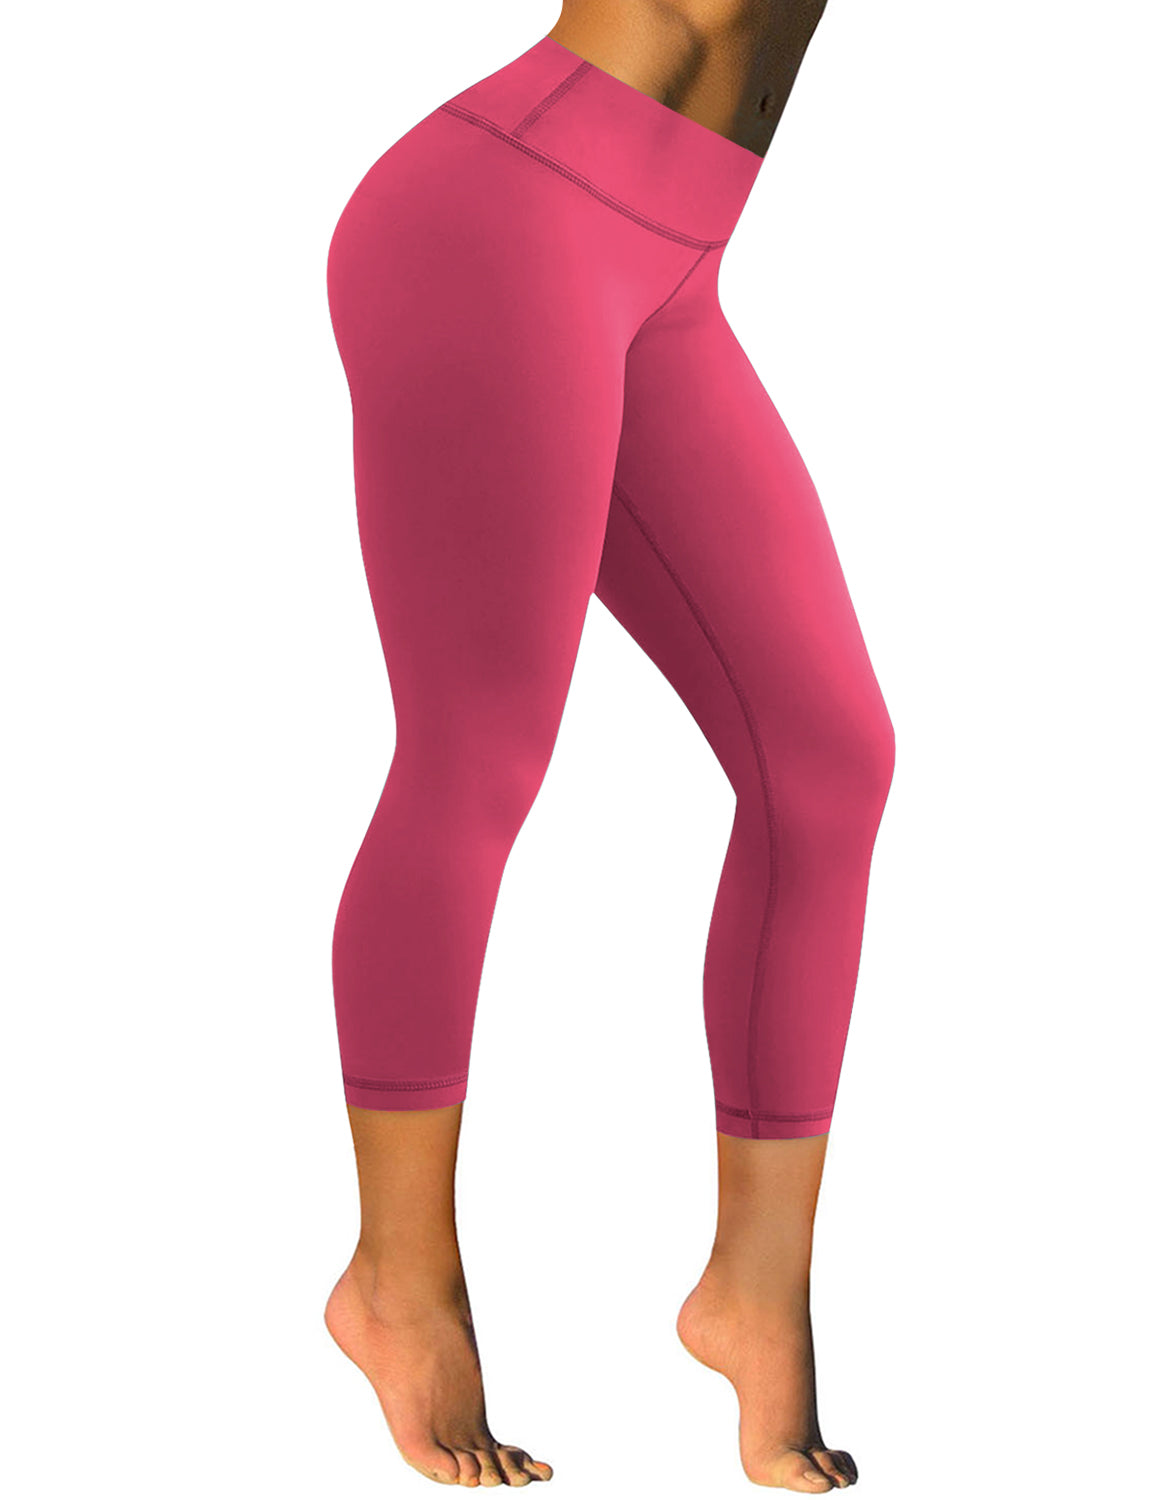 Lycra Double 6 High Rise Bubblelime Yoga Pants Antibacterial Nude Sense  Leggings For Running And Tight Sweatpants No T Line Buttery Soft And  Nourishing EET002 From Hyf5456, $20.07